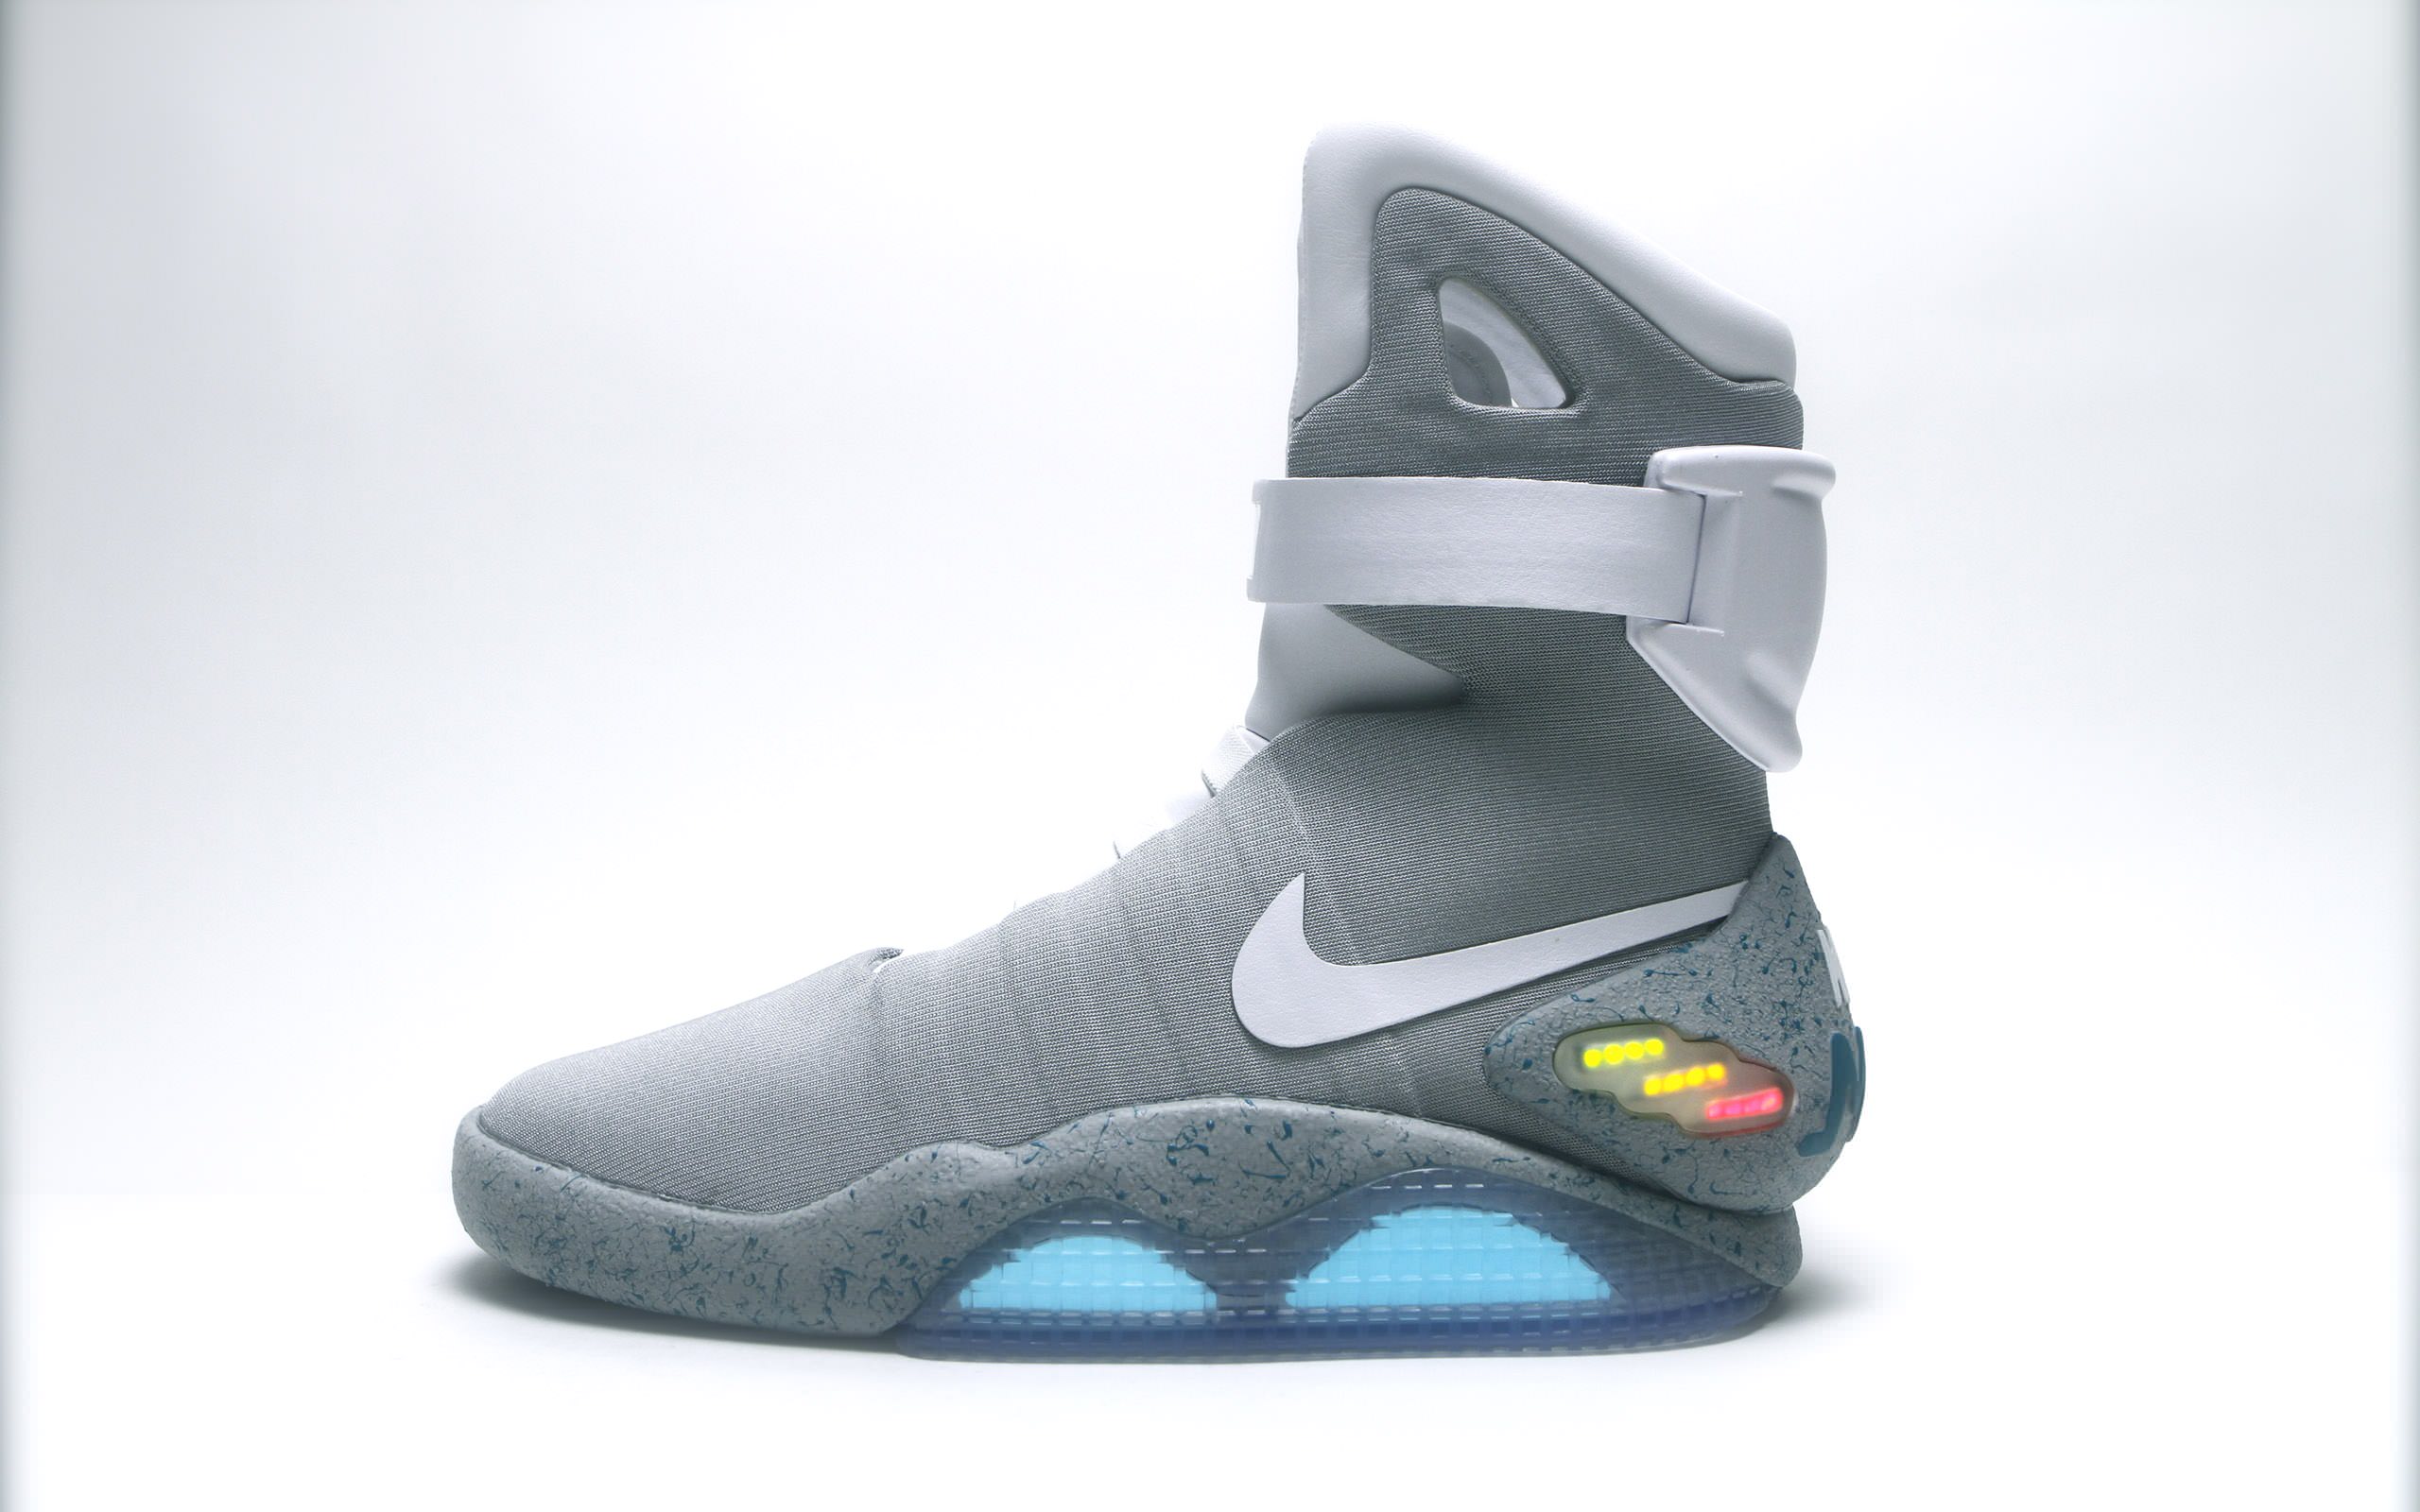 Back to the Future Part II Nike MAG Release | The Mary Sue